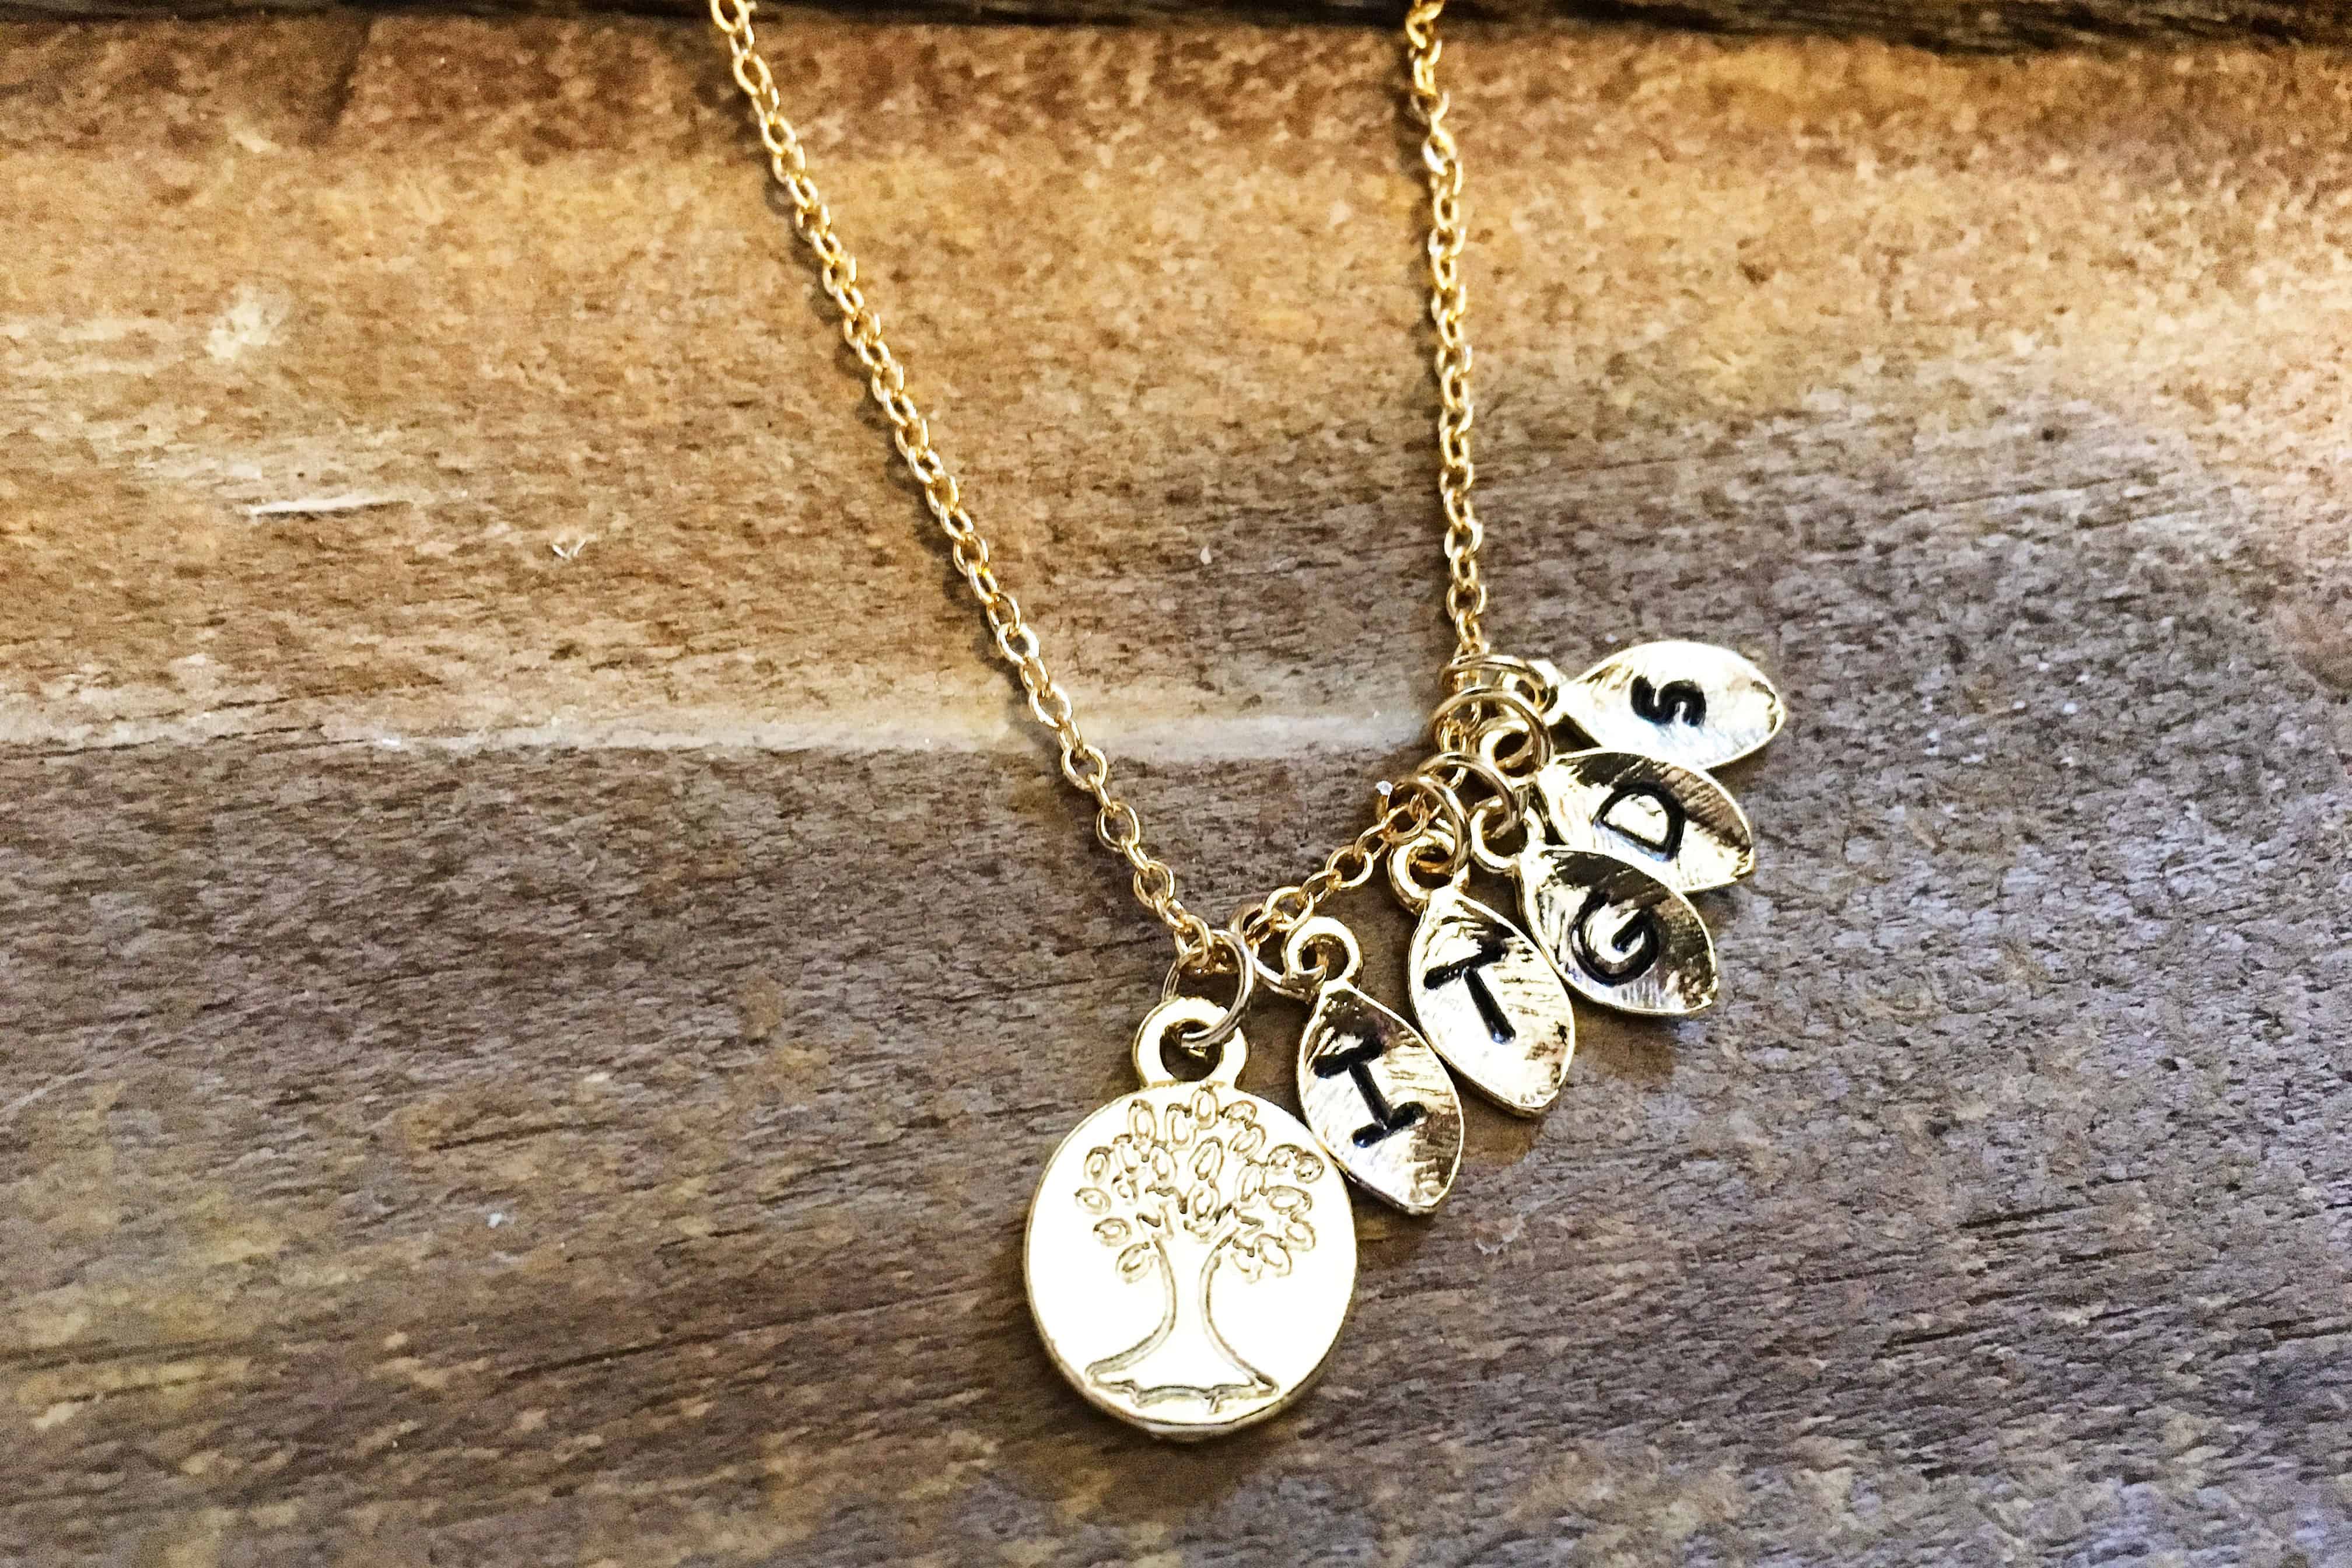 Family tree Gold necklace, starting at $17